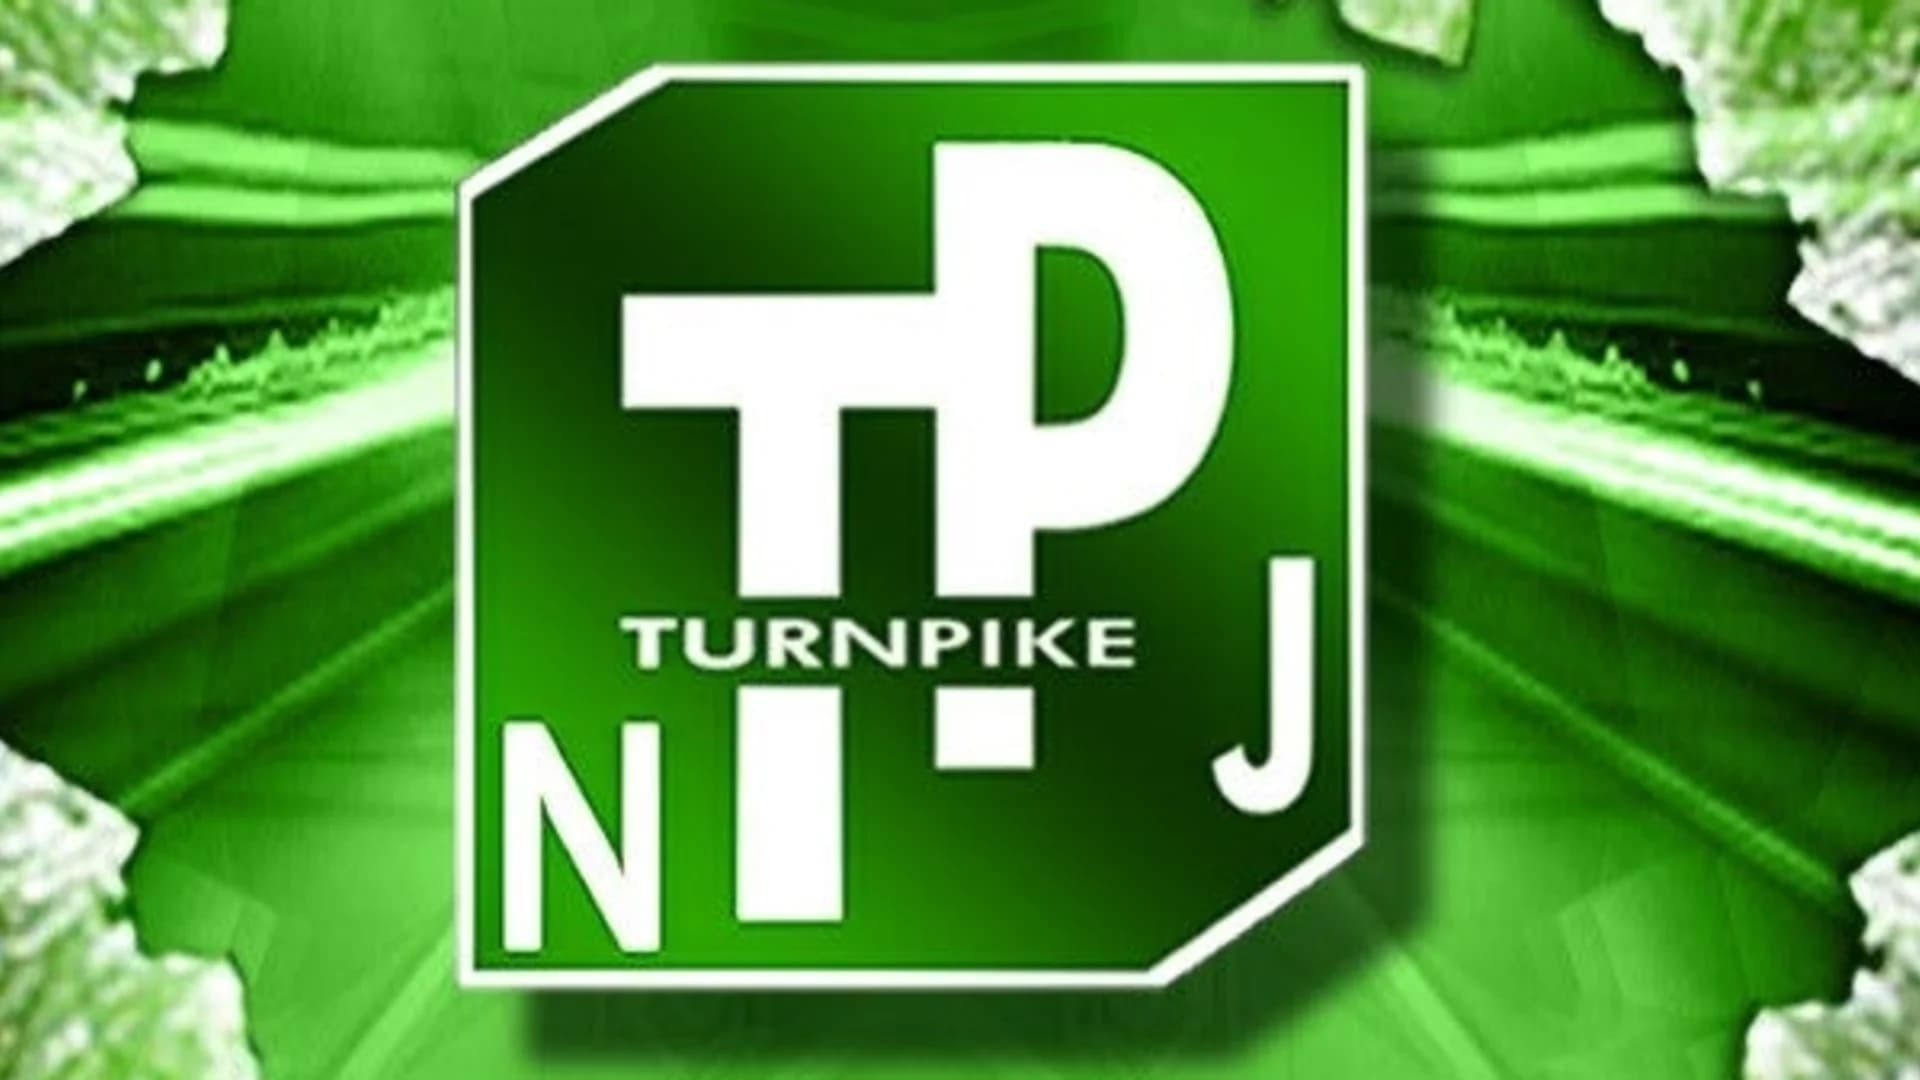 Police: Person changing tire fatally struck on turnpike